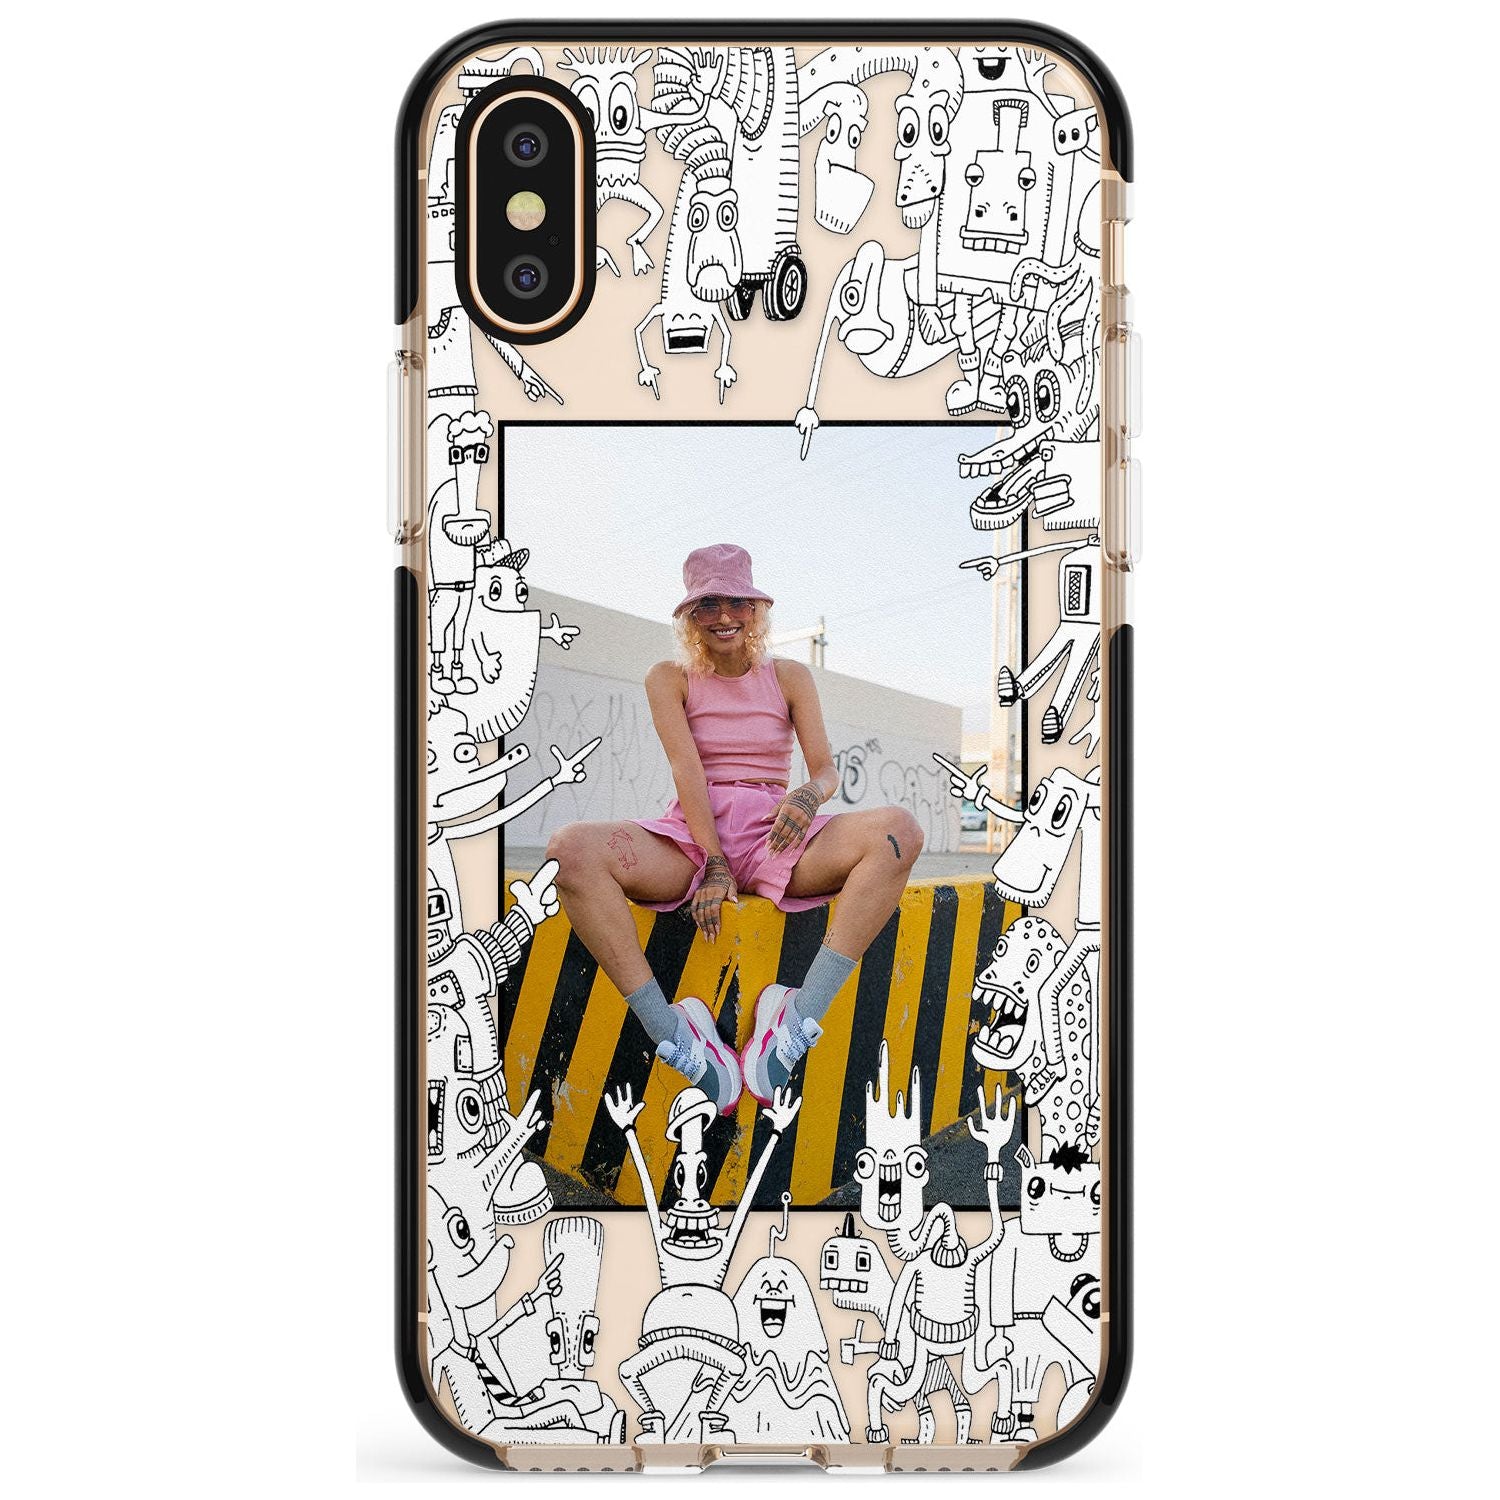 Personalised Look At This Photo Case Black Impact Phone Case for iPhone X XS Max XR